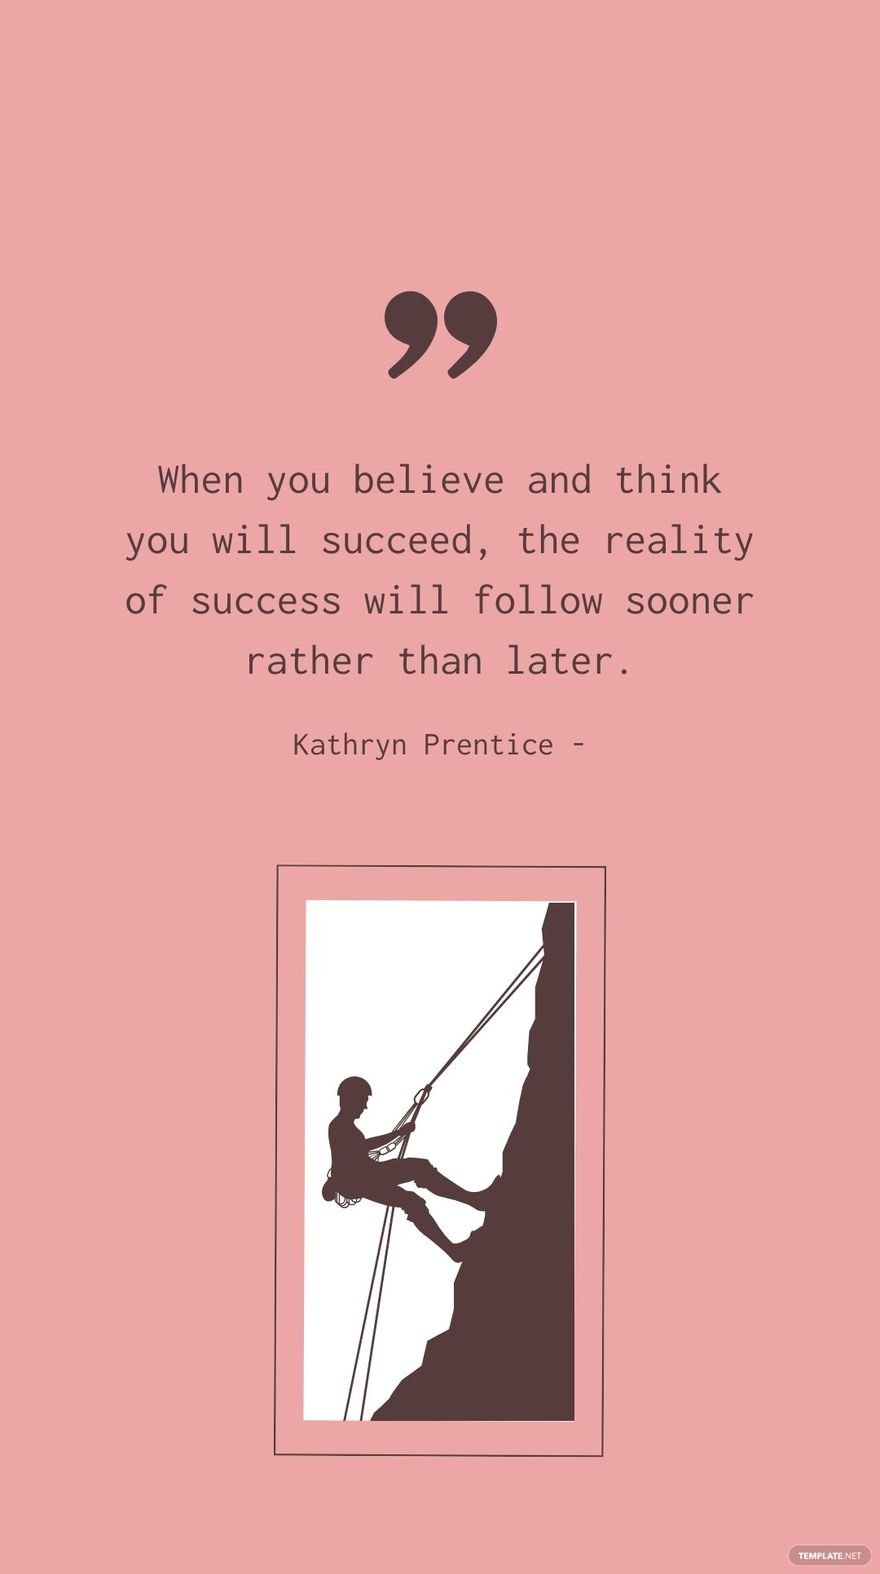 Kathryn Prentice - When you believe and think you will succeed, the reality of success will follow sooner rather than later.